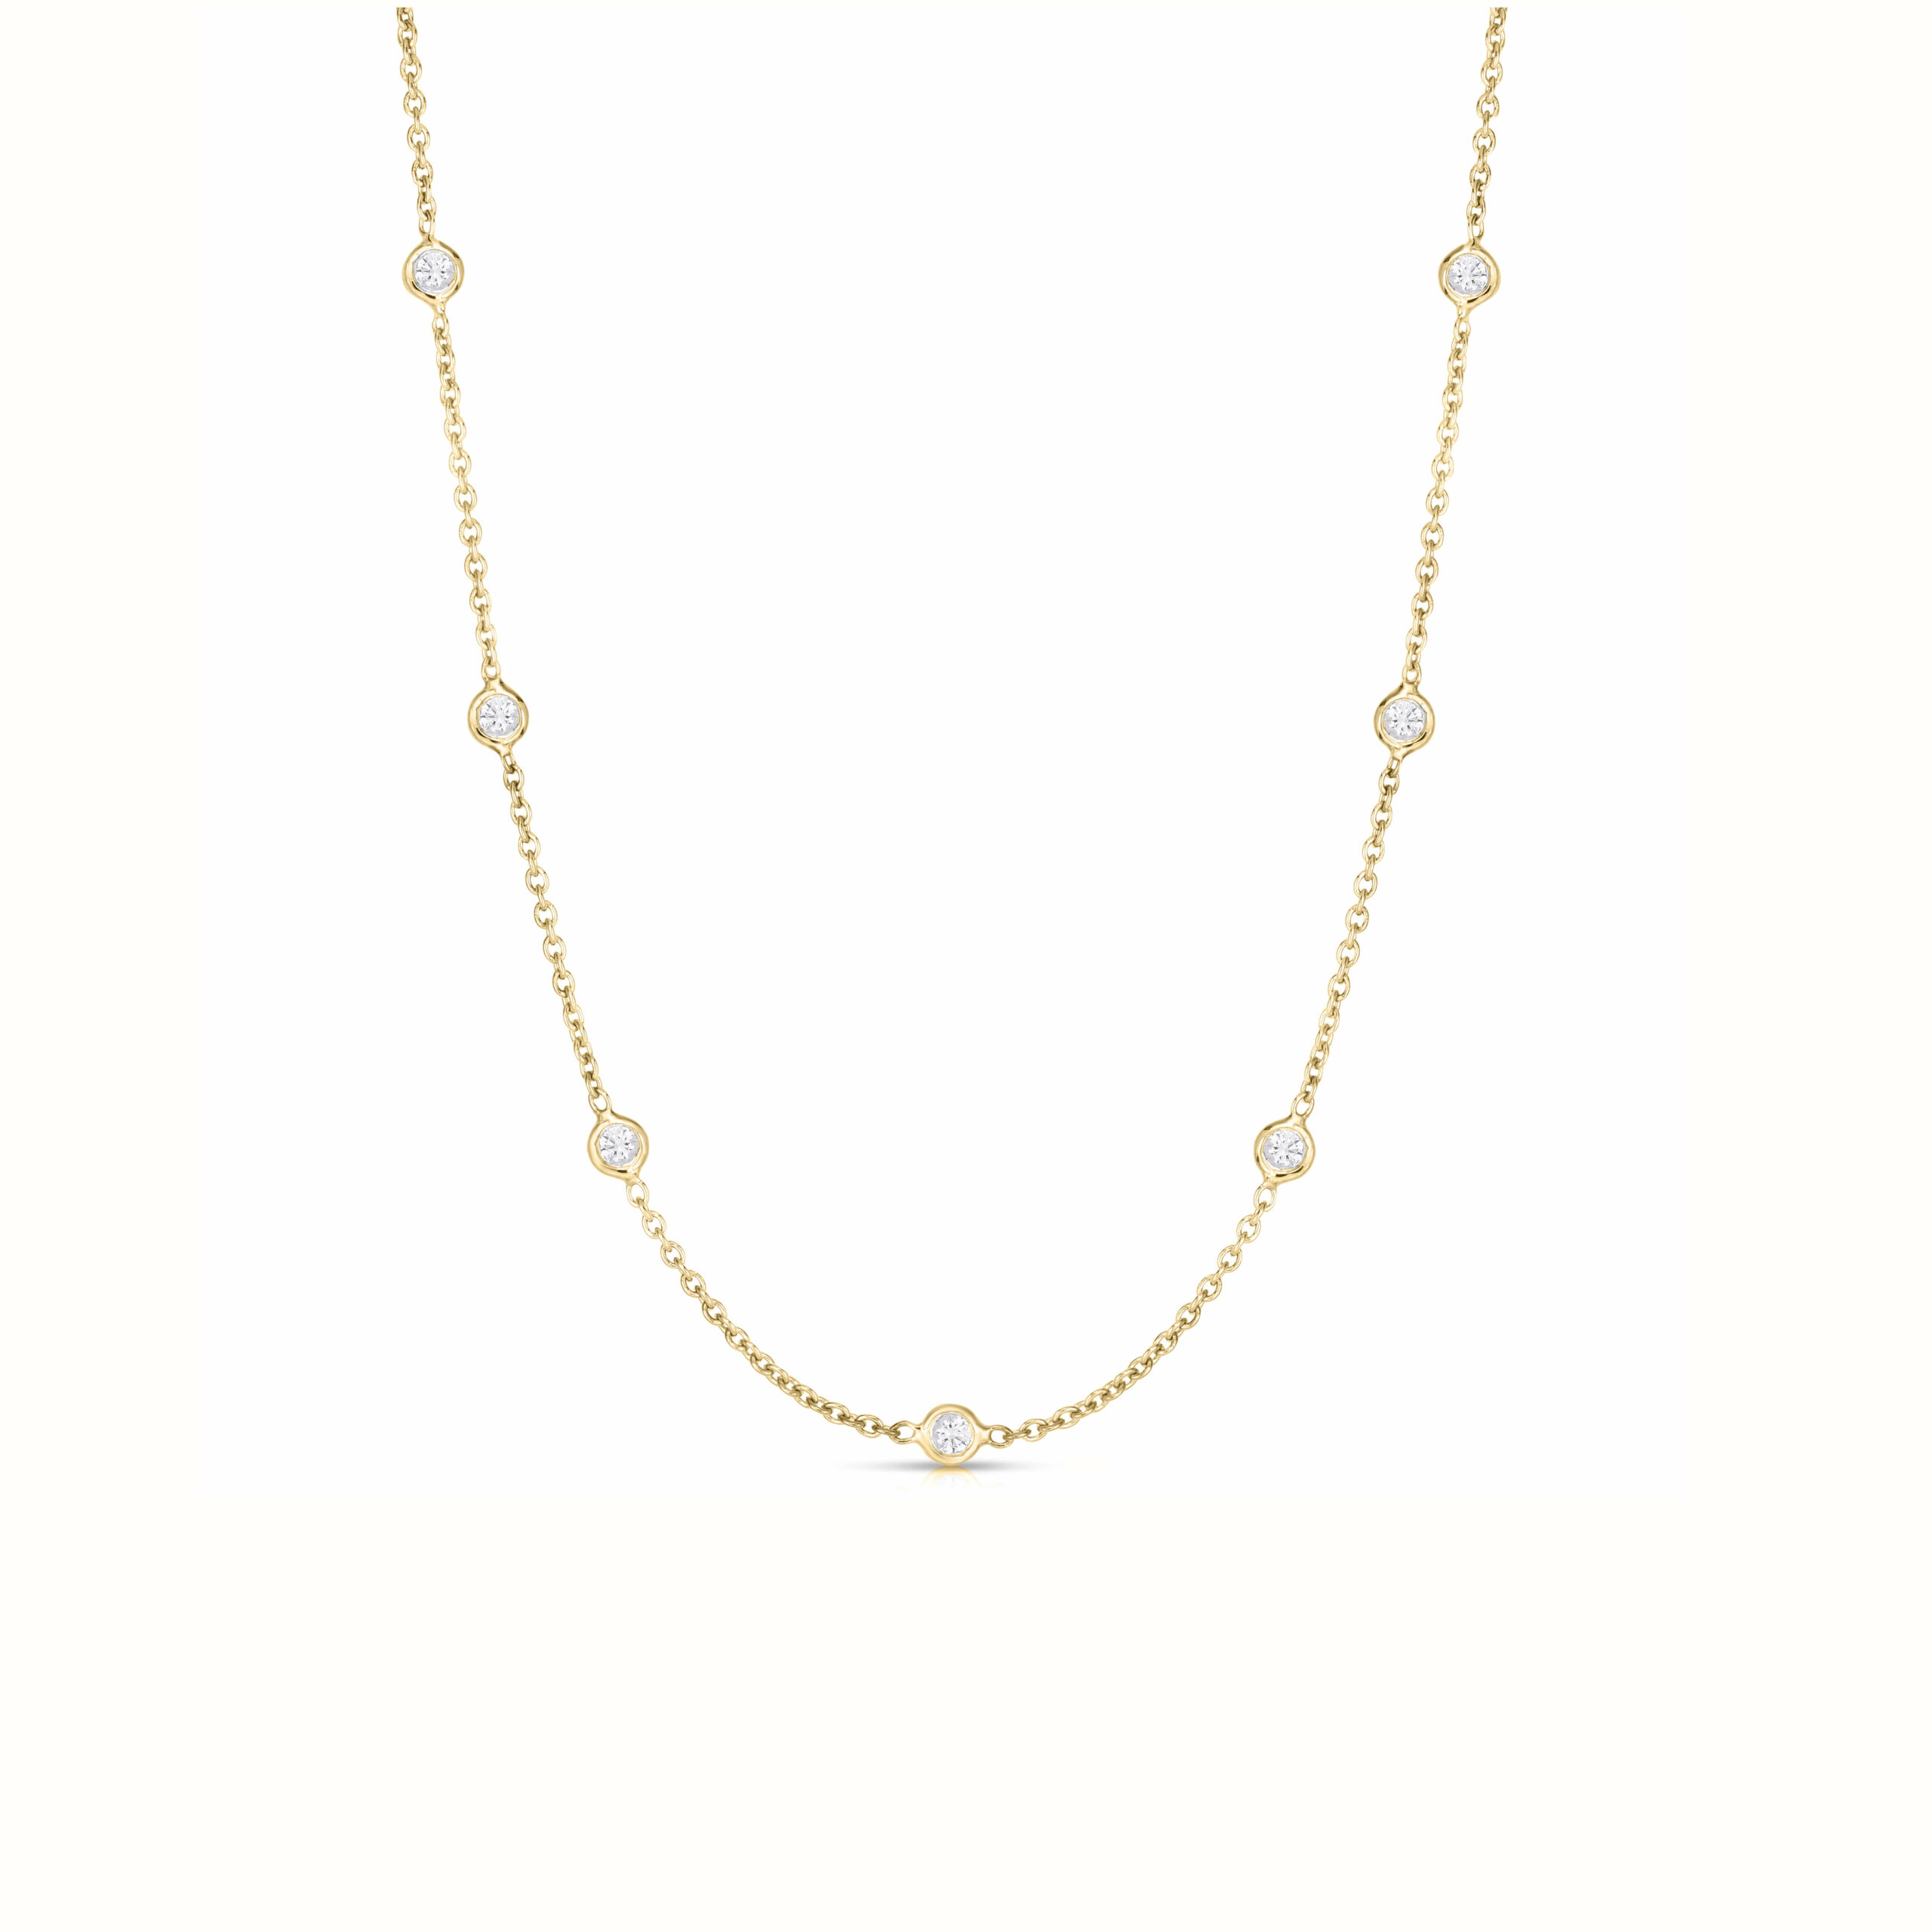 124613Diamonds by the Yard Necklace